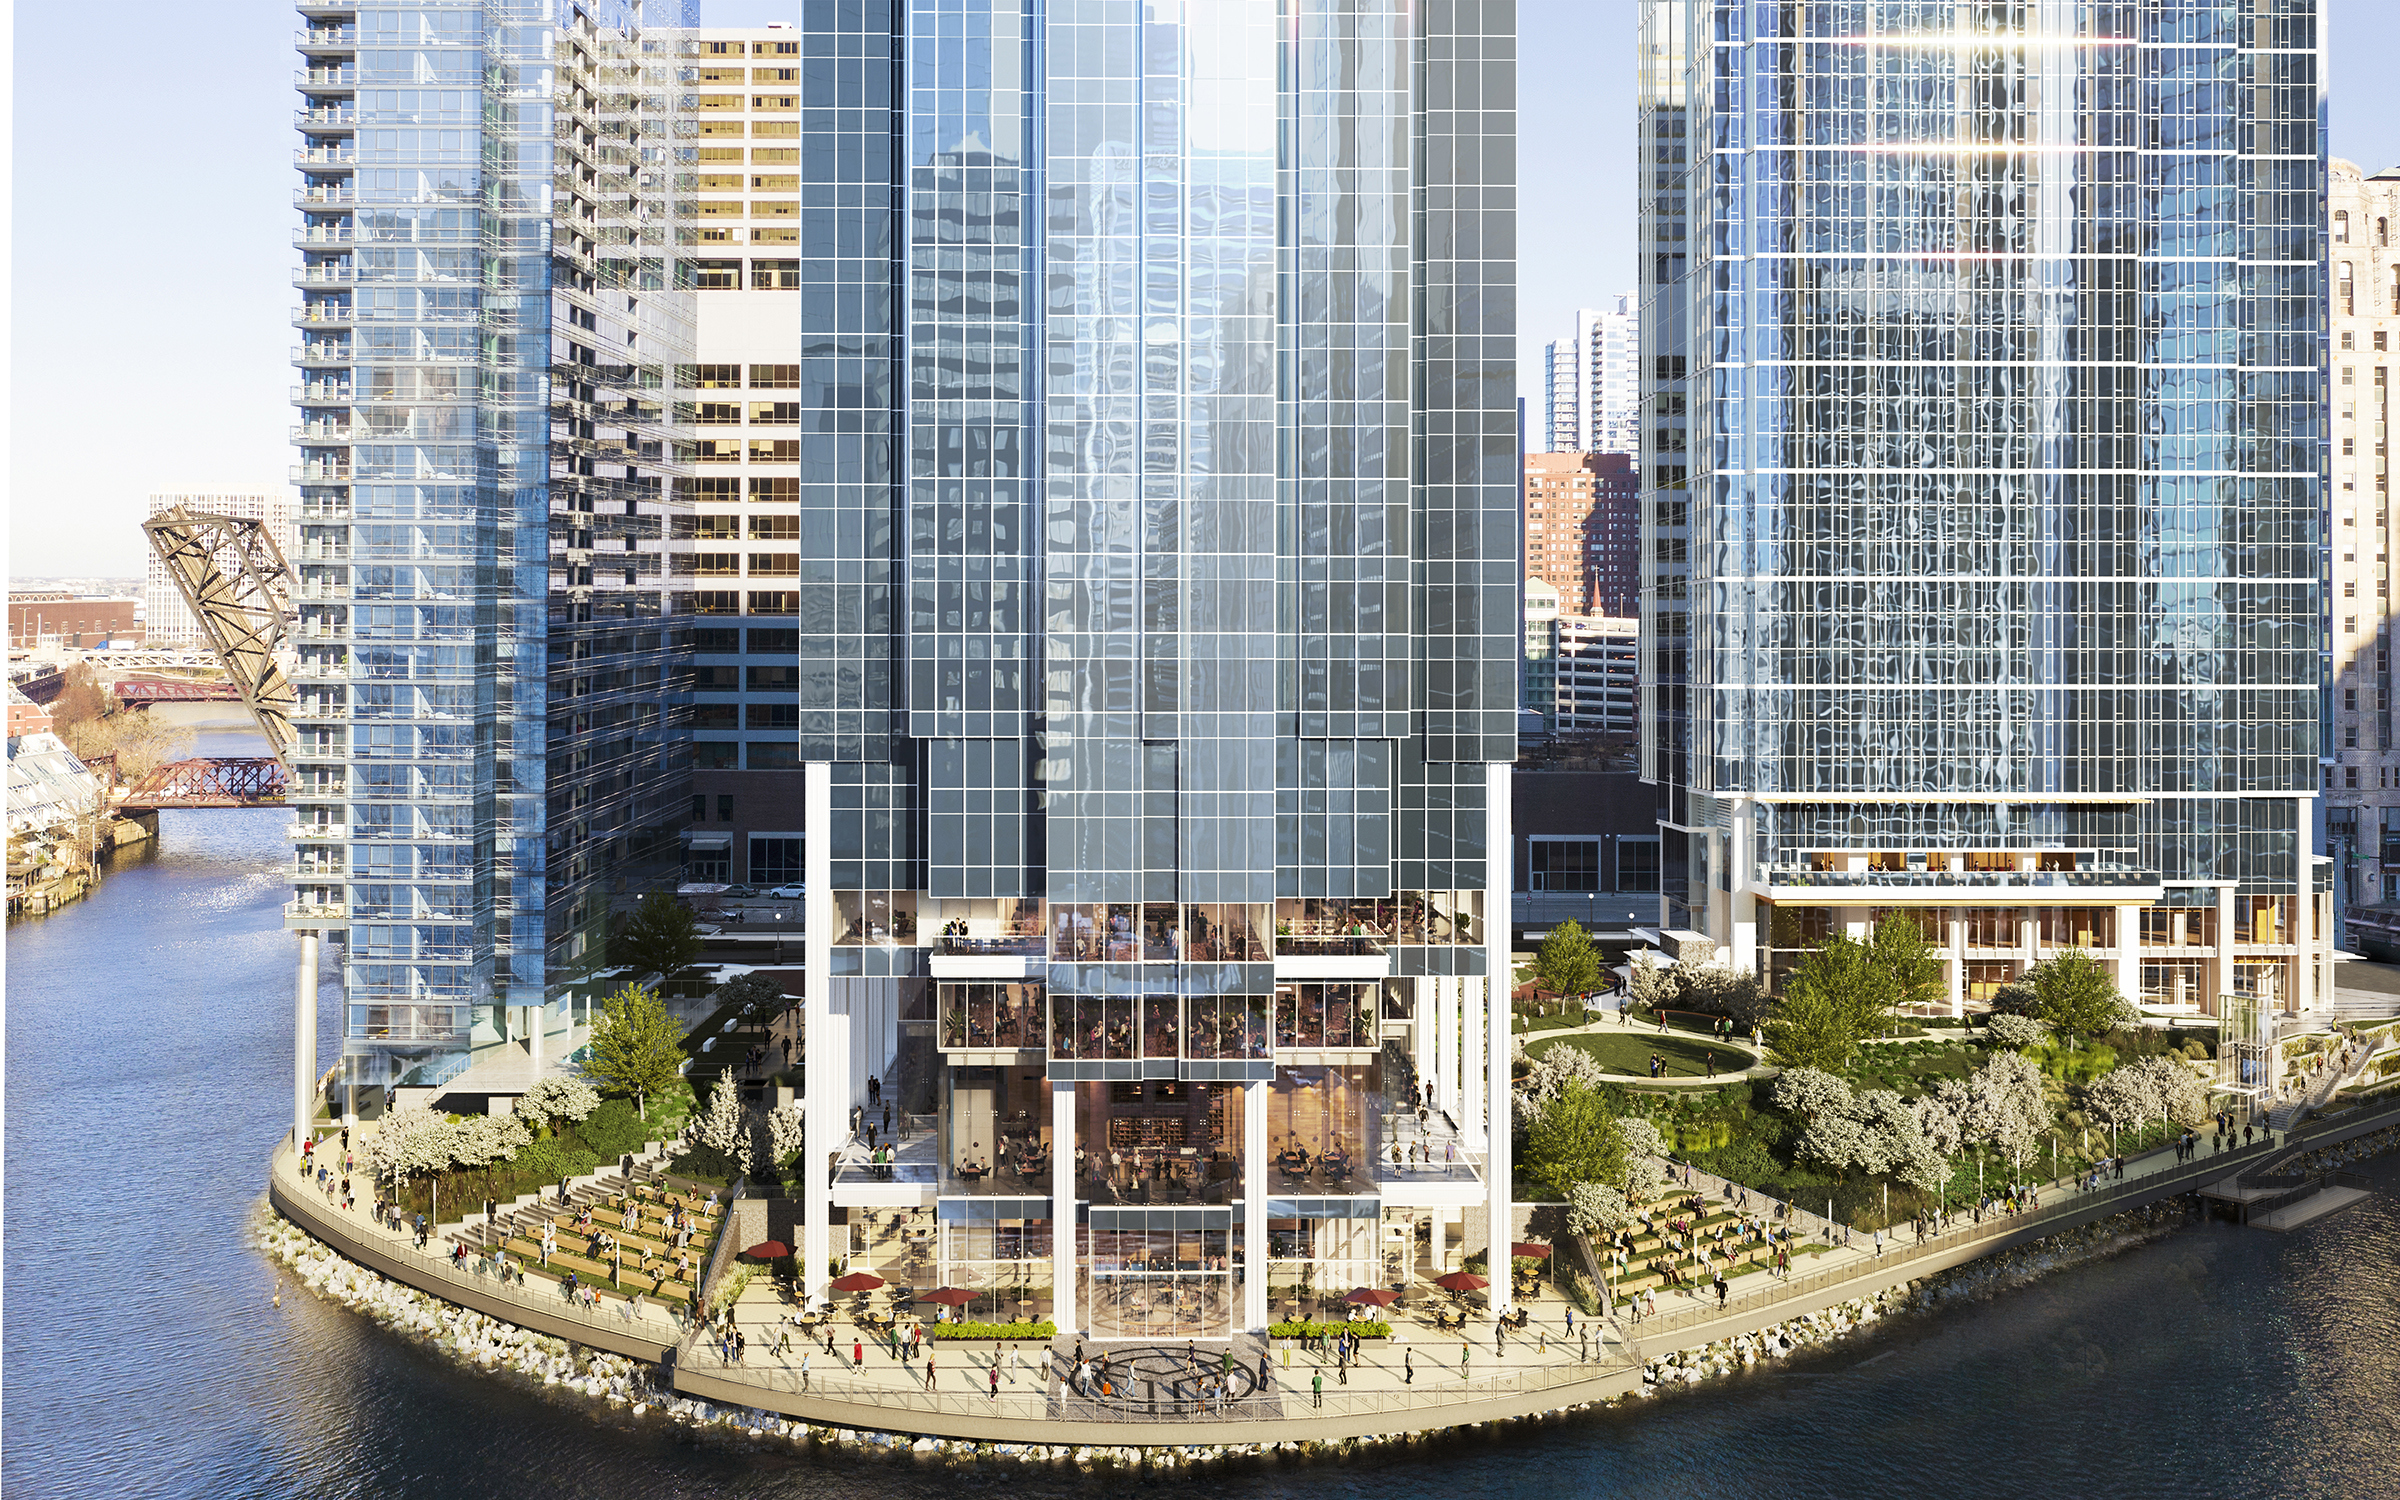 Redefining legacy in Chicago hot spot on the river: Wolf Point